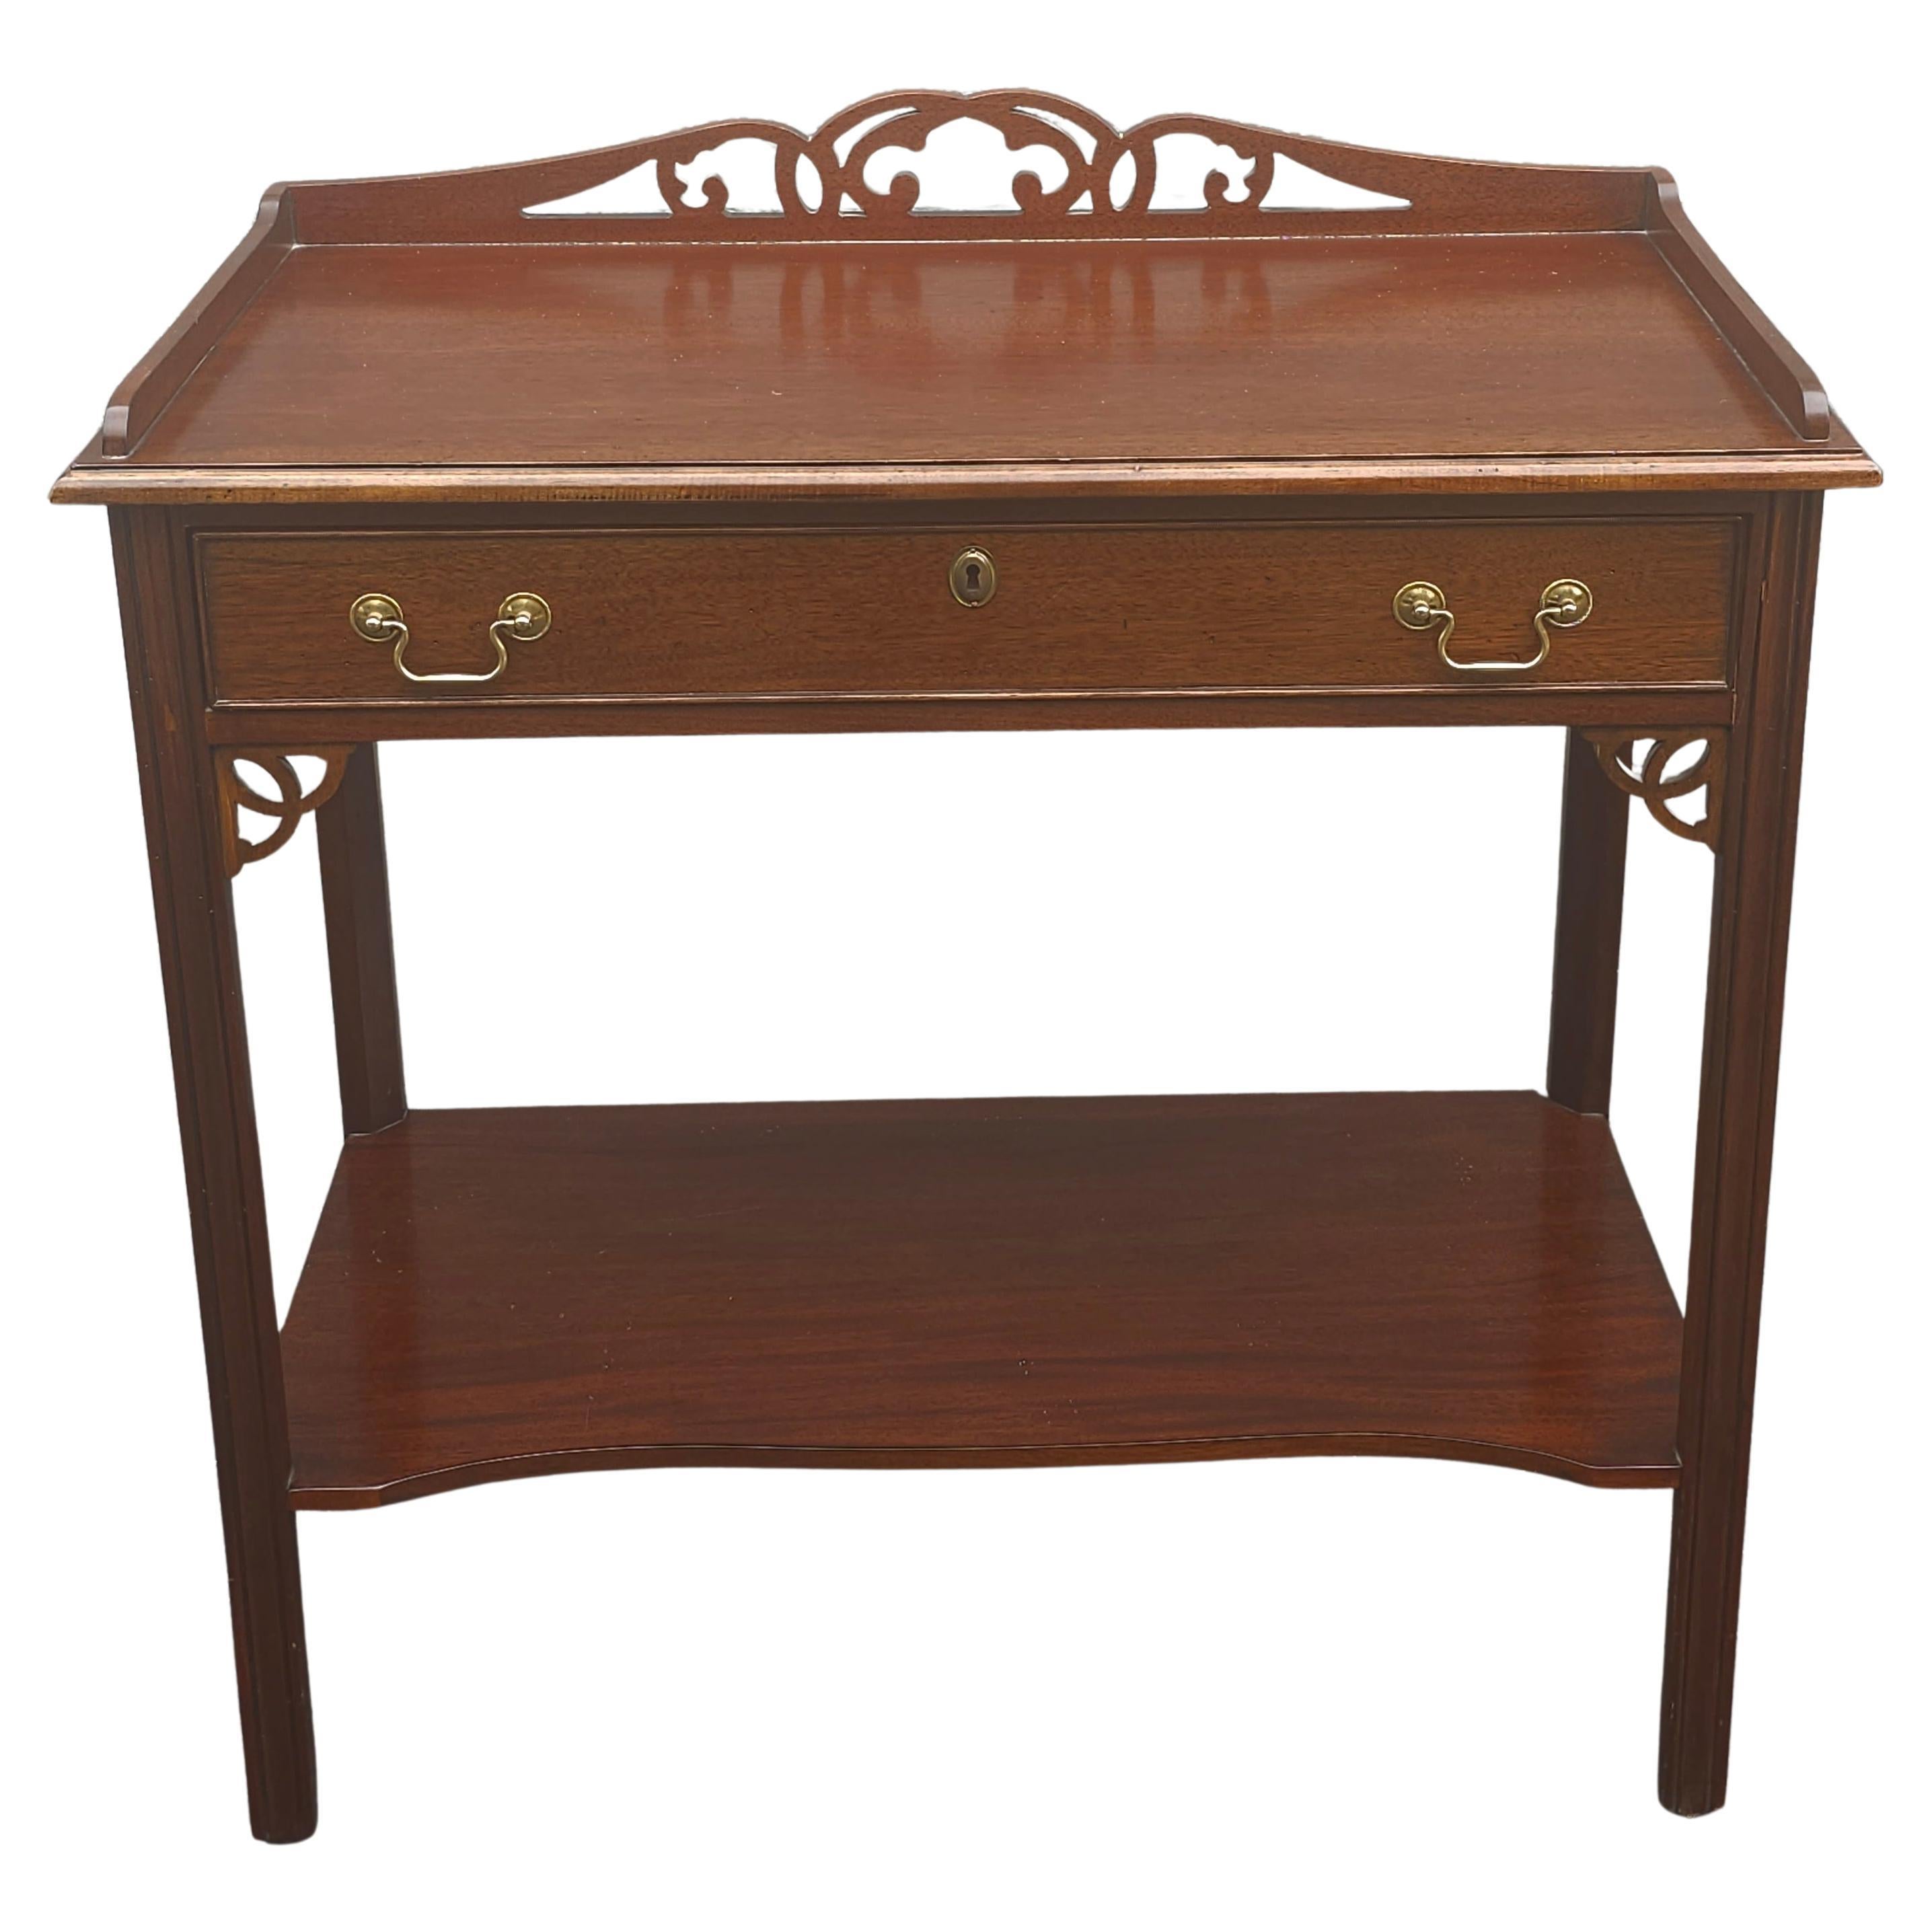 Early 21st Century Chippendale Mahogany Server  / Drybar For Sale